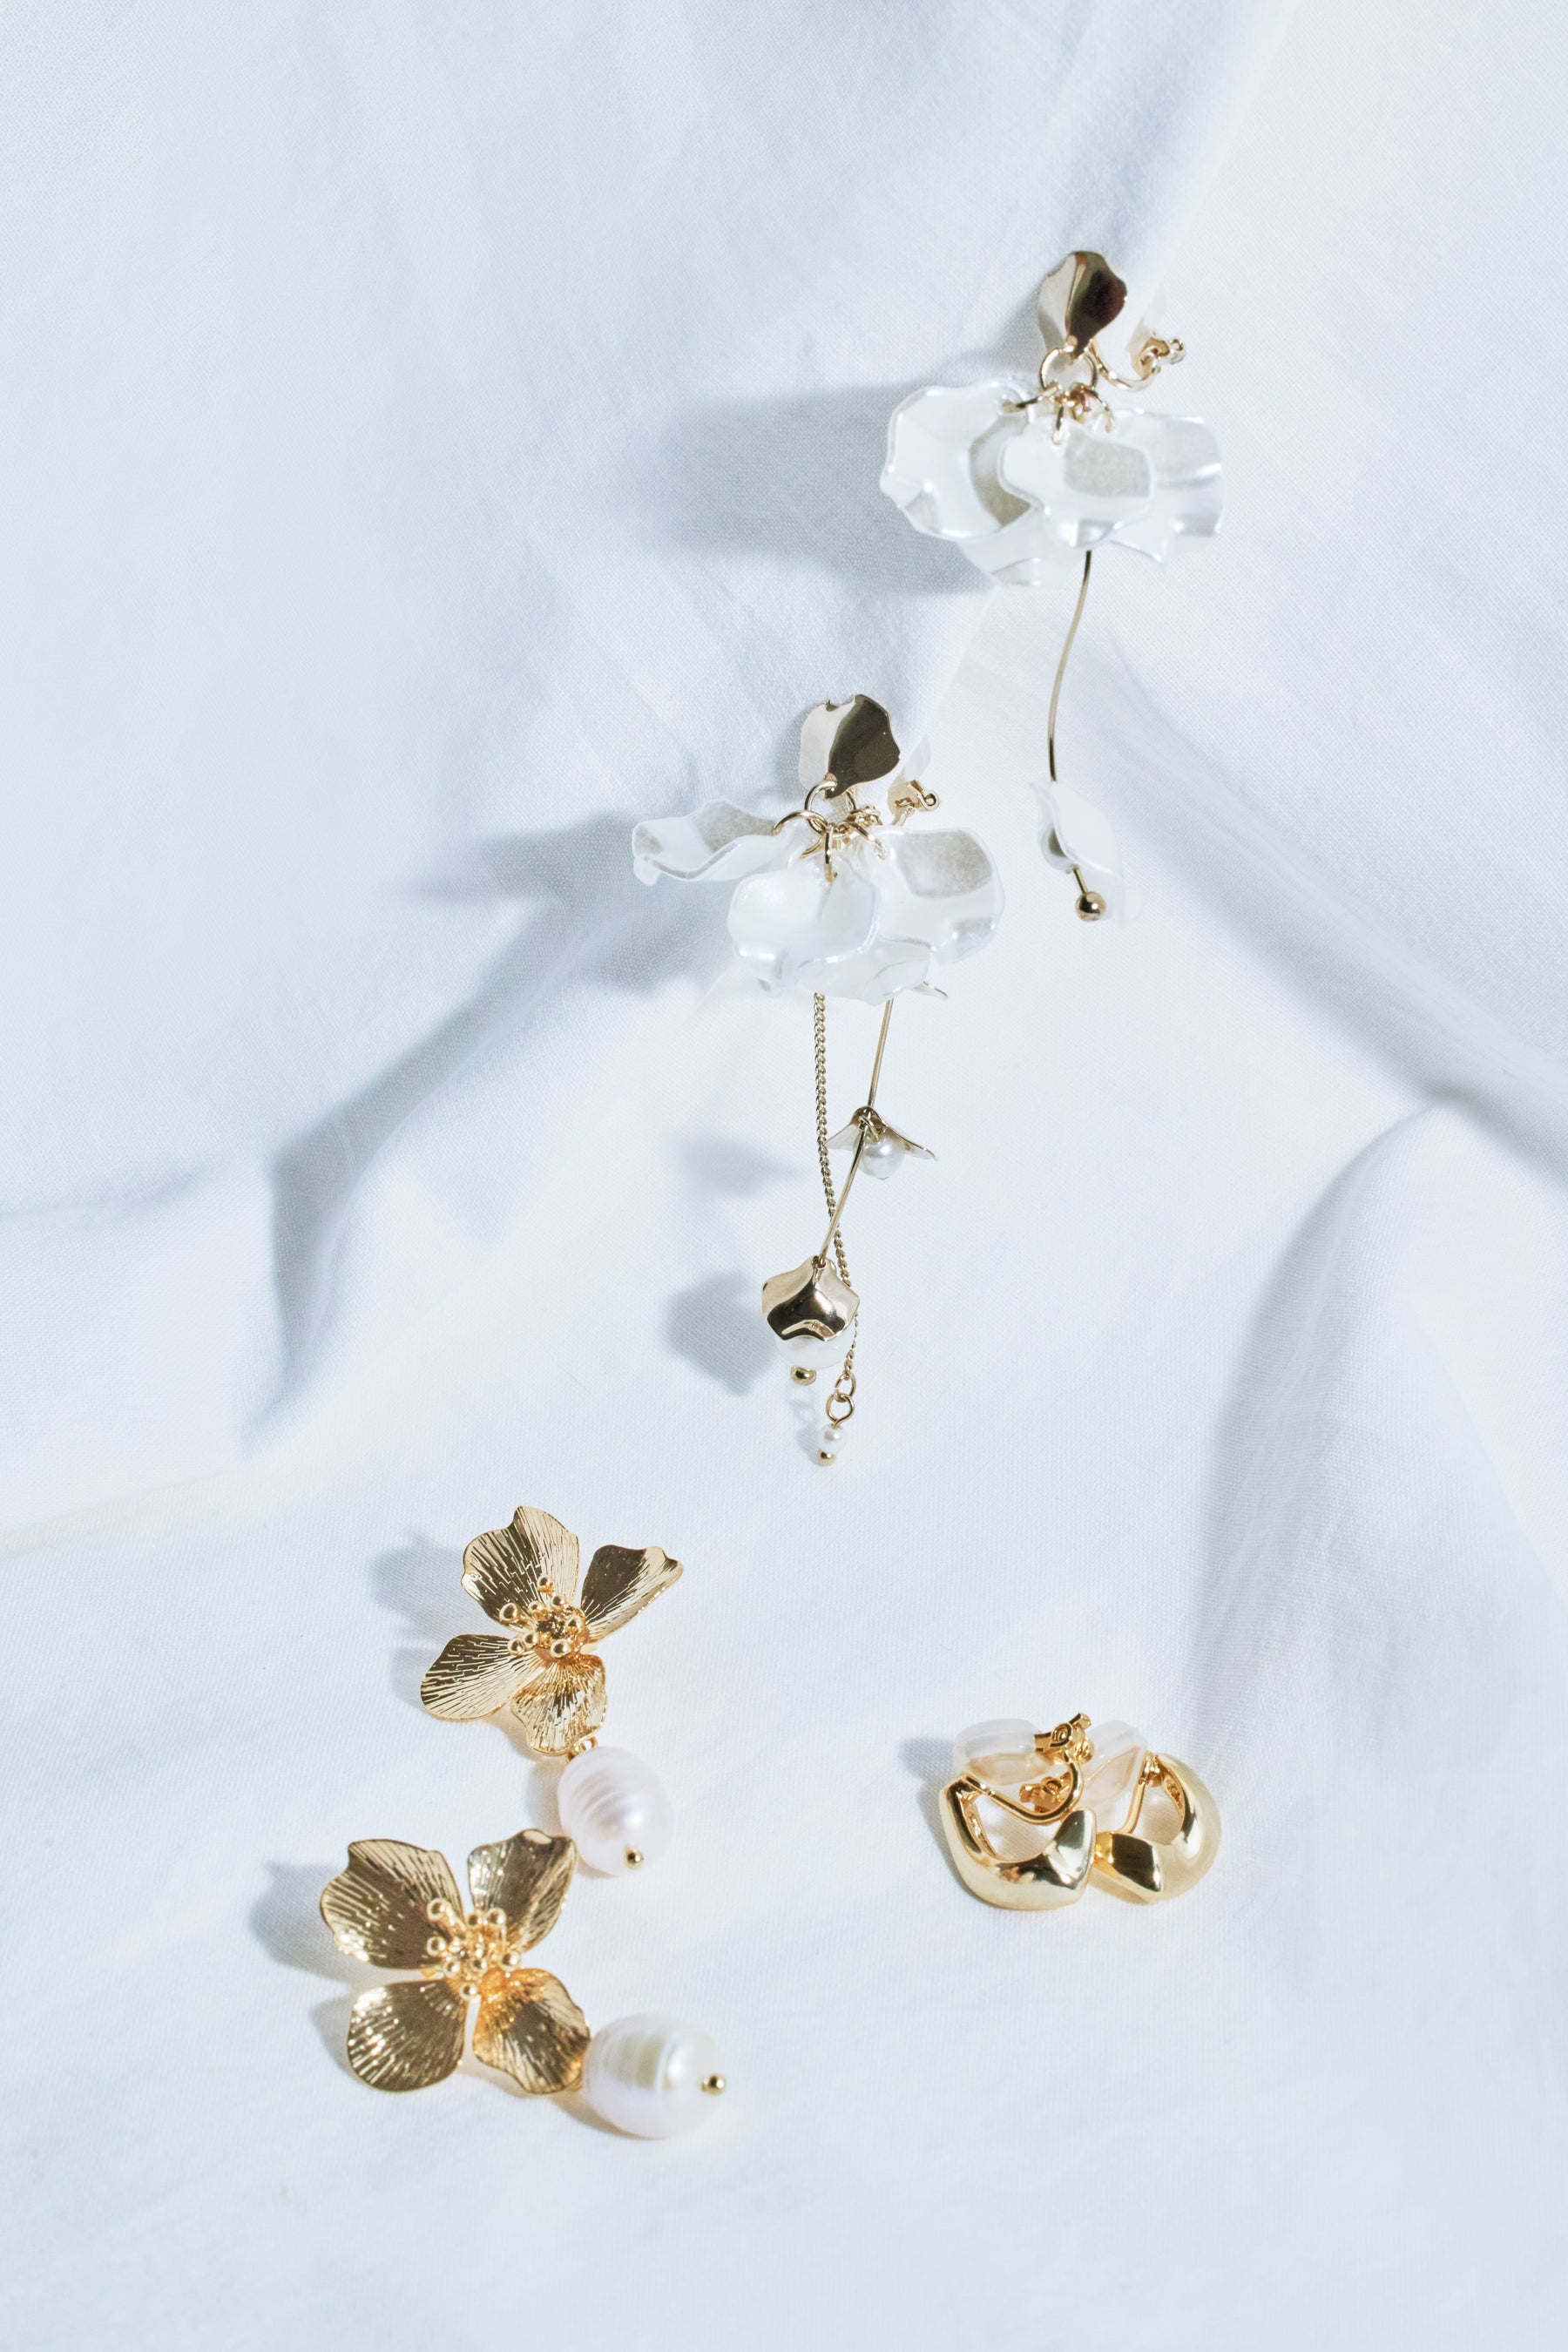 [Shipped in mid-April] Pearl Gold Floral Earrings